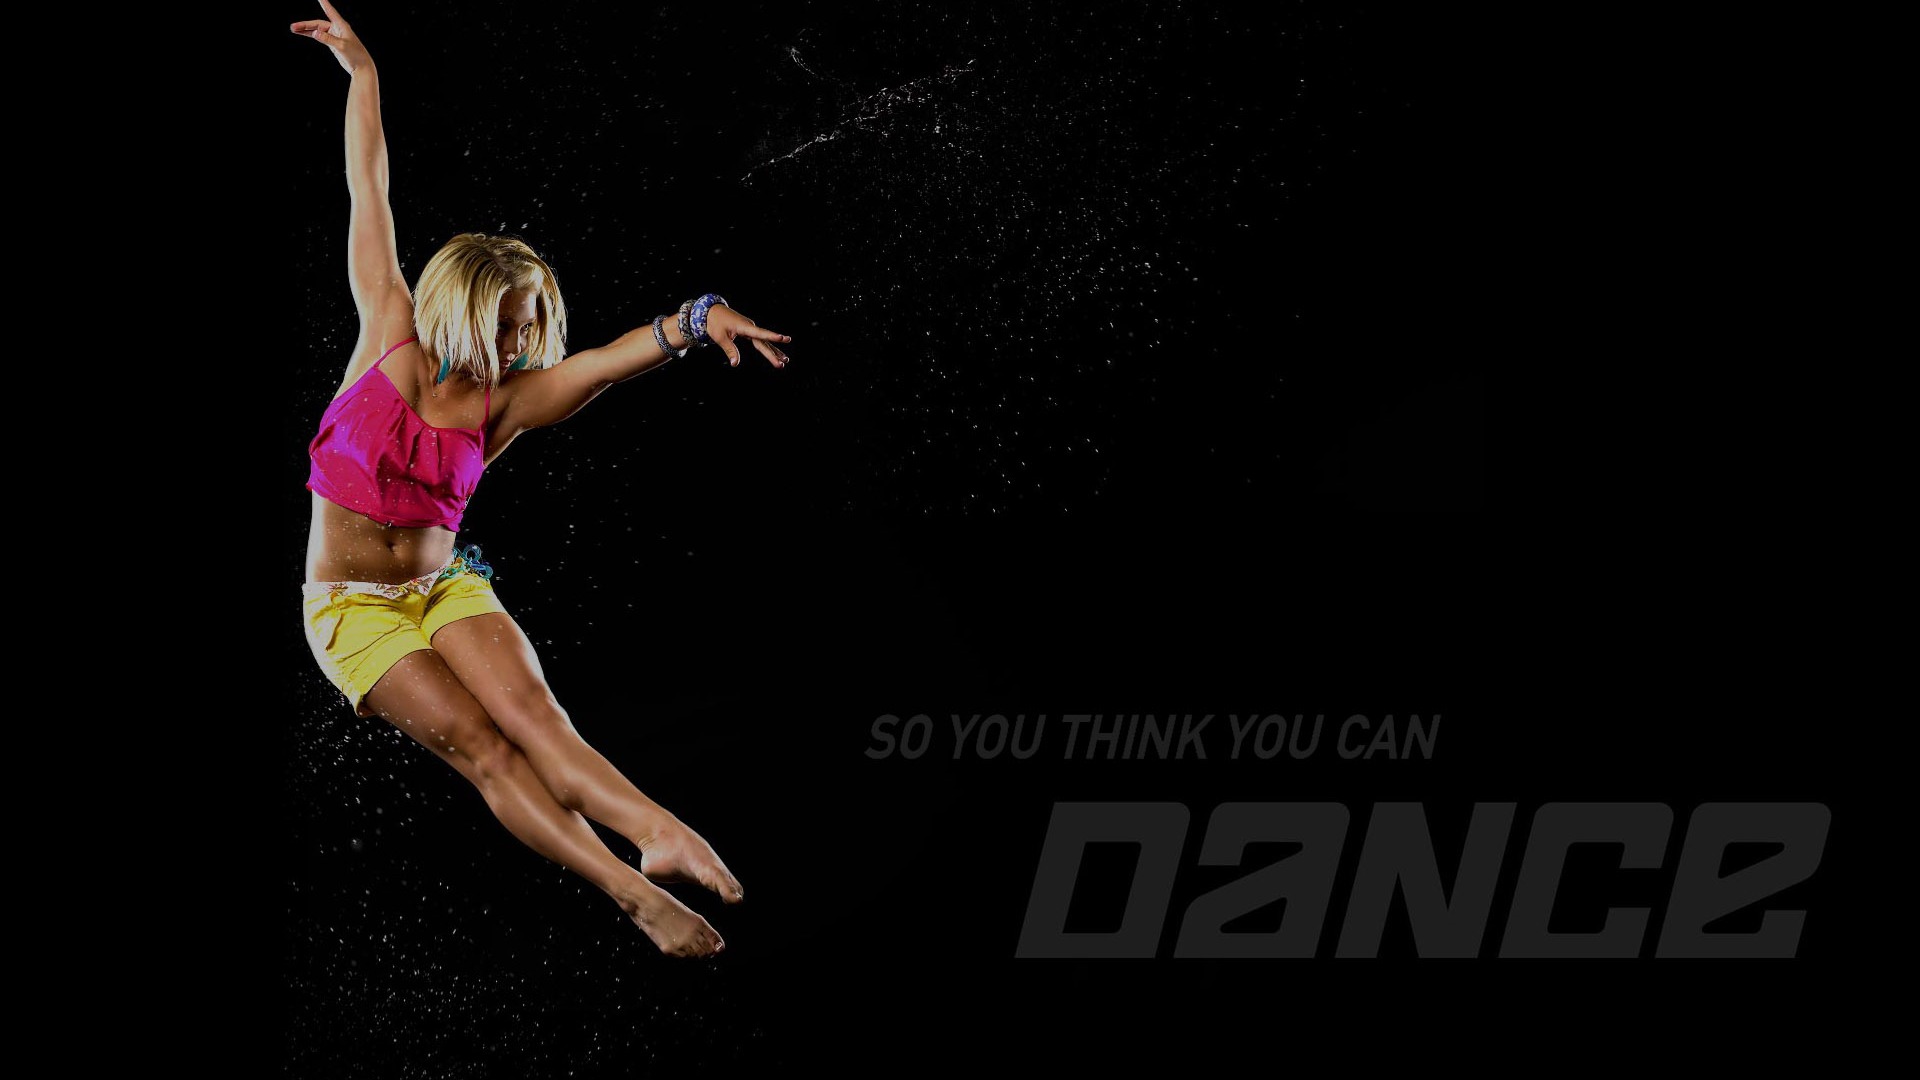 So You Think You Can Dance wallpaper (1) #5 - 1920x1080